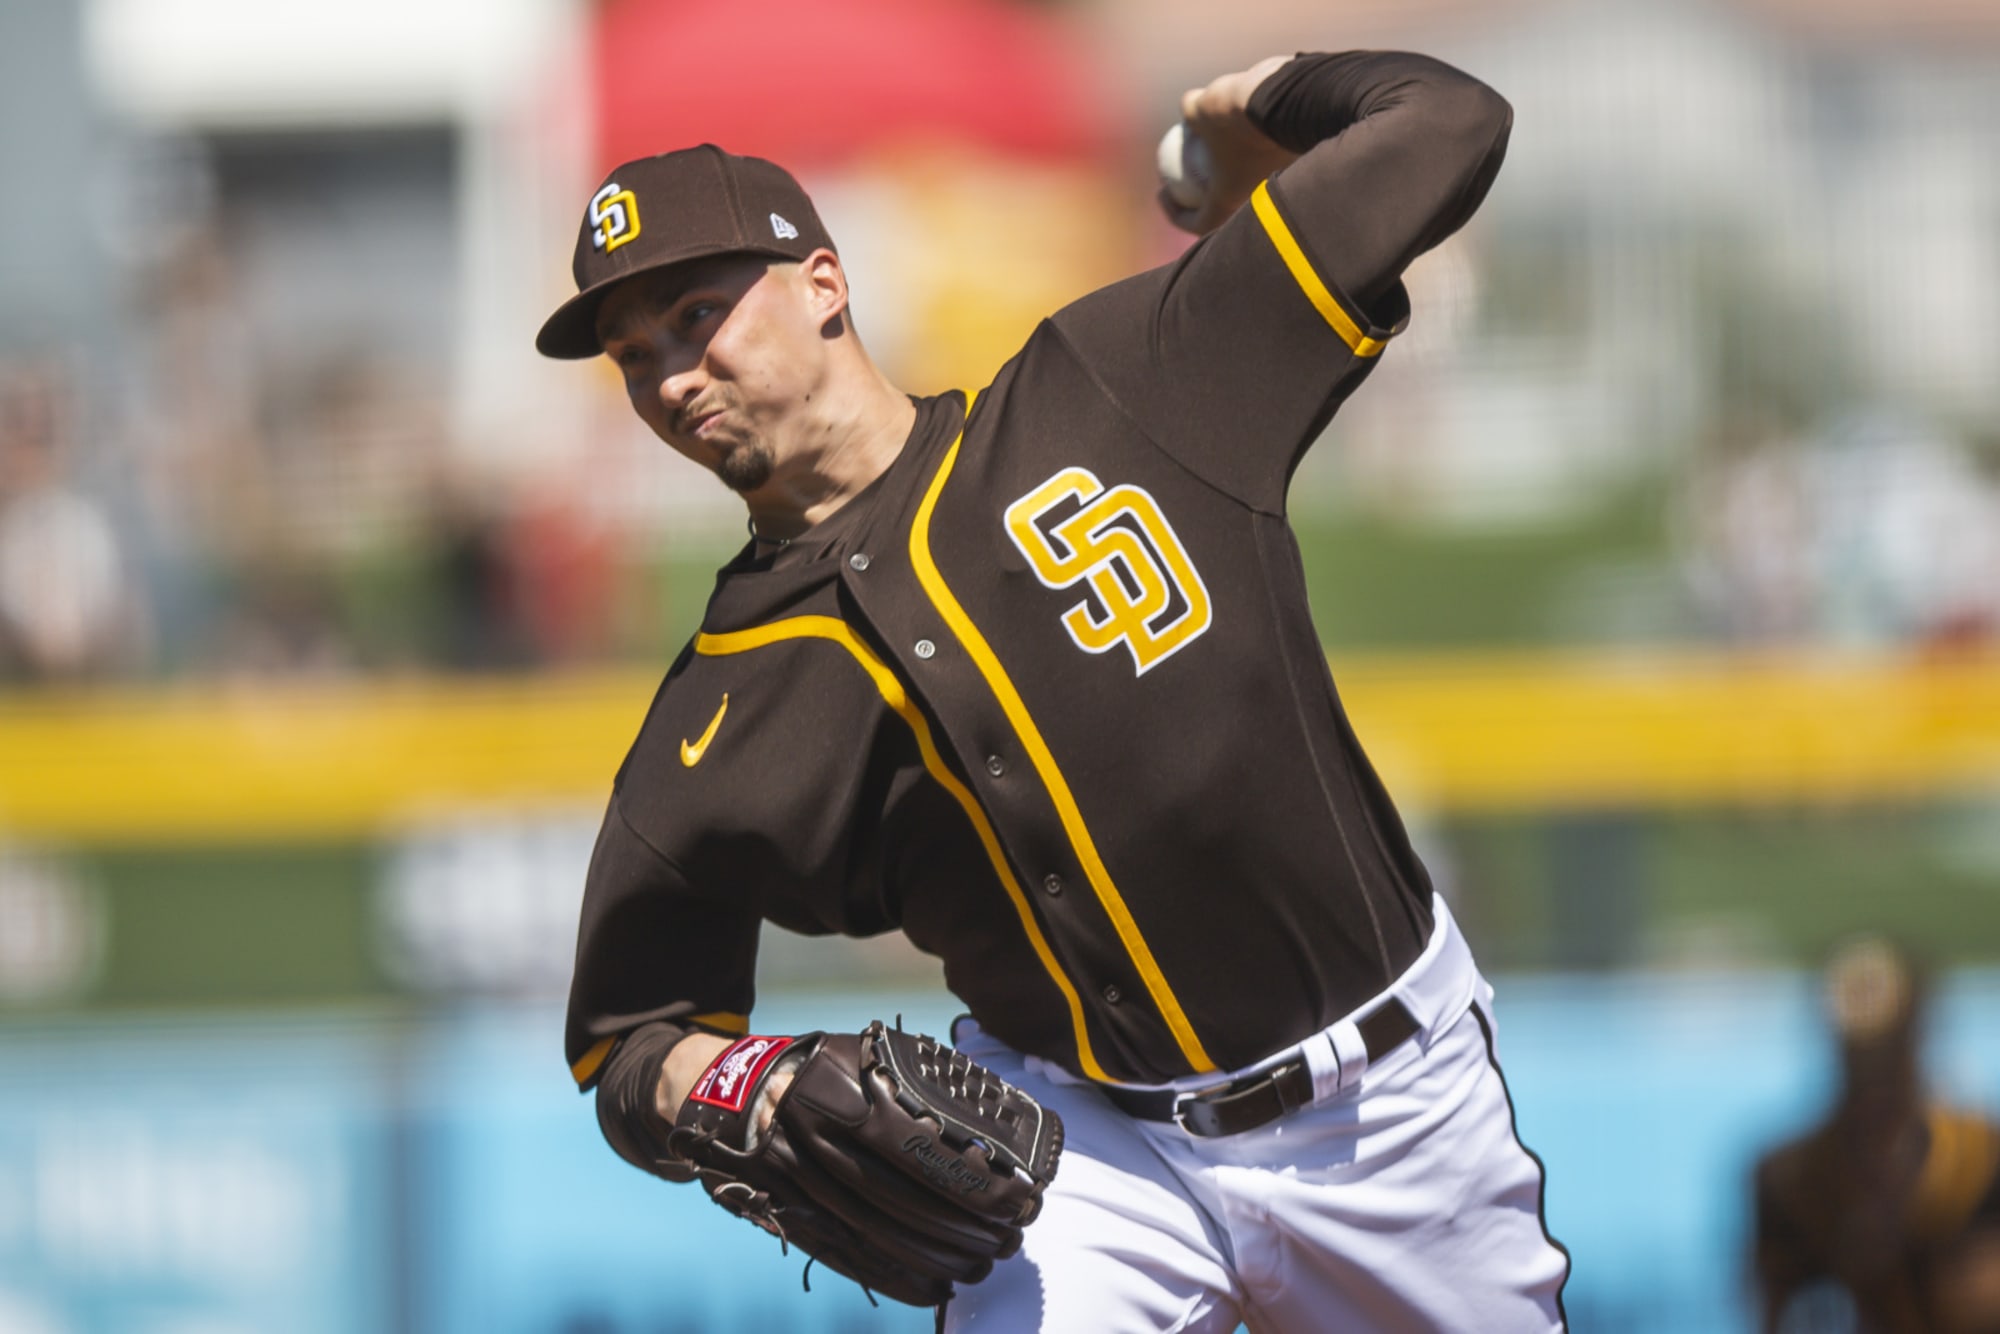 Padres: Is Blake Snell's spring a precursor to a Cy Young season?